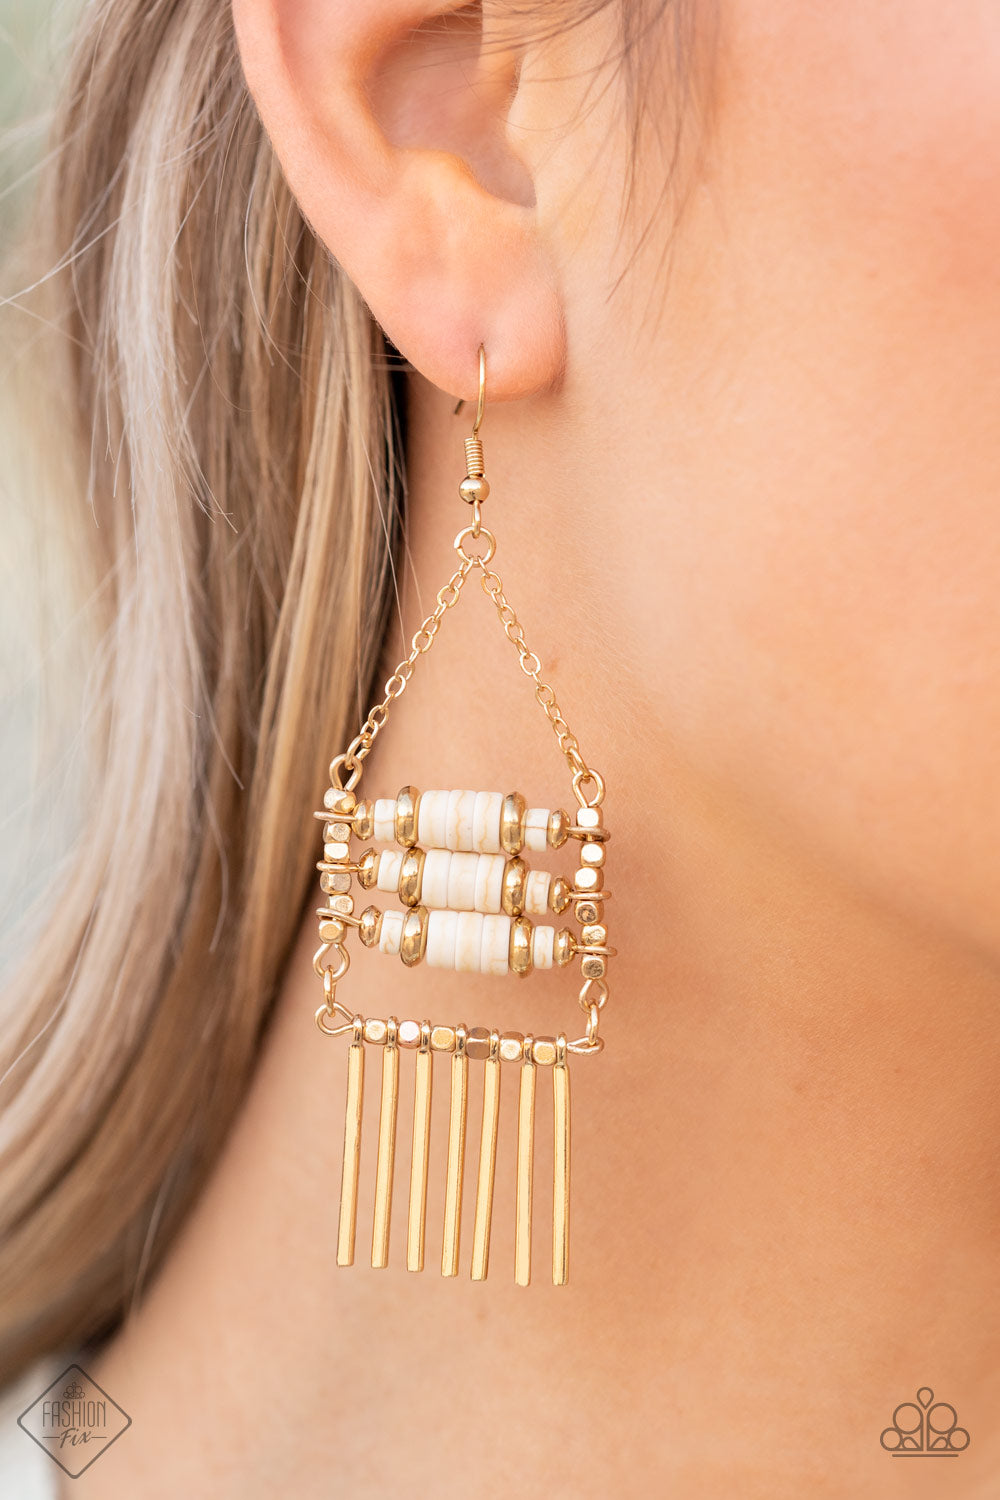 Tribal Tapestry - Gold Earrings - Fashion Fix